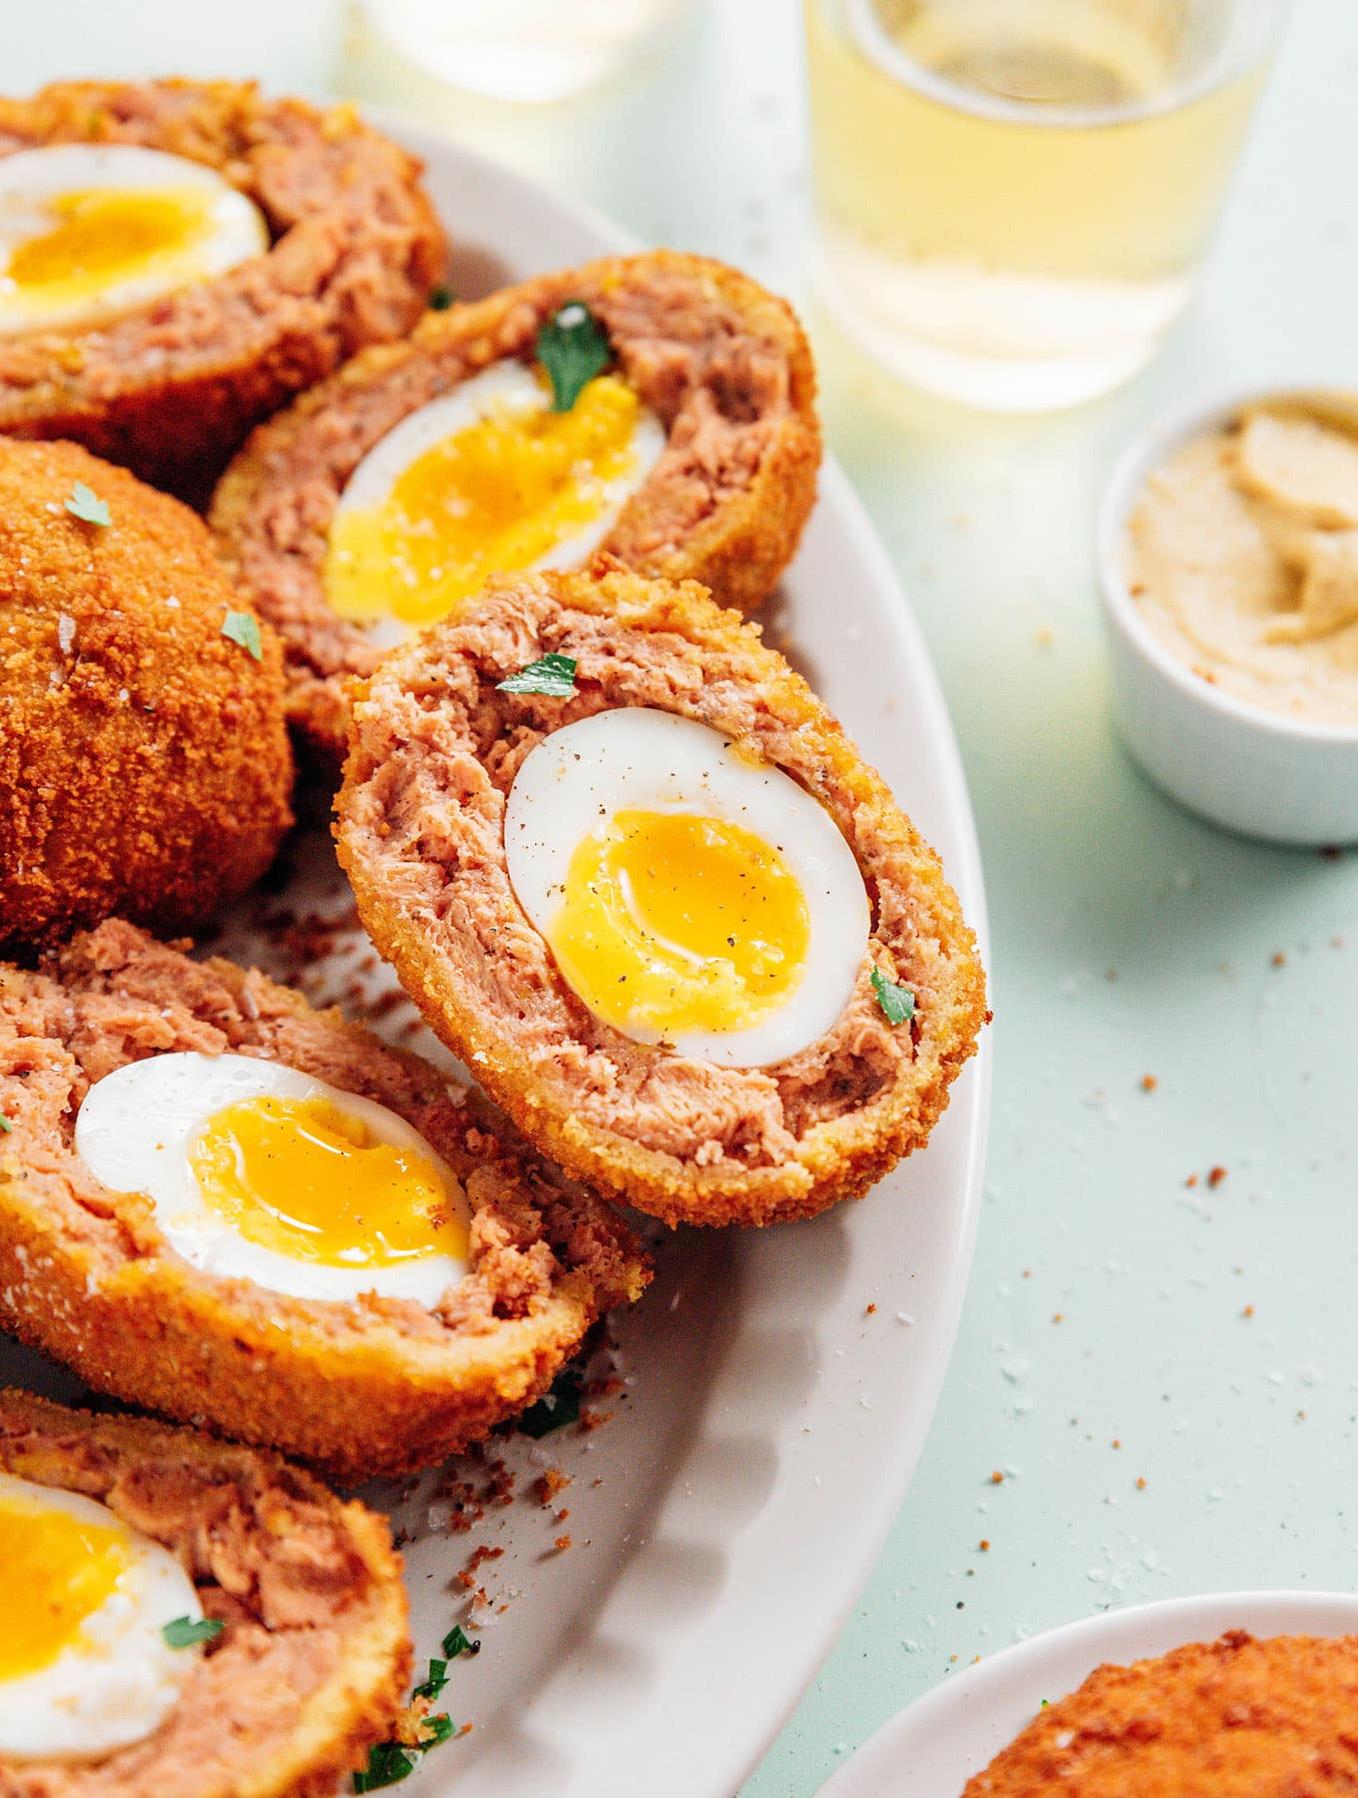  Get ready to wow your dinner guests with this show-stopping Vegan Scotch Eggs!